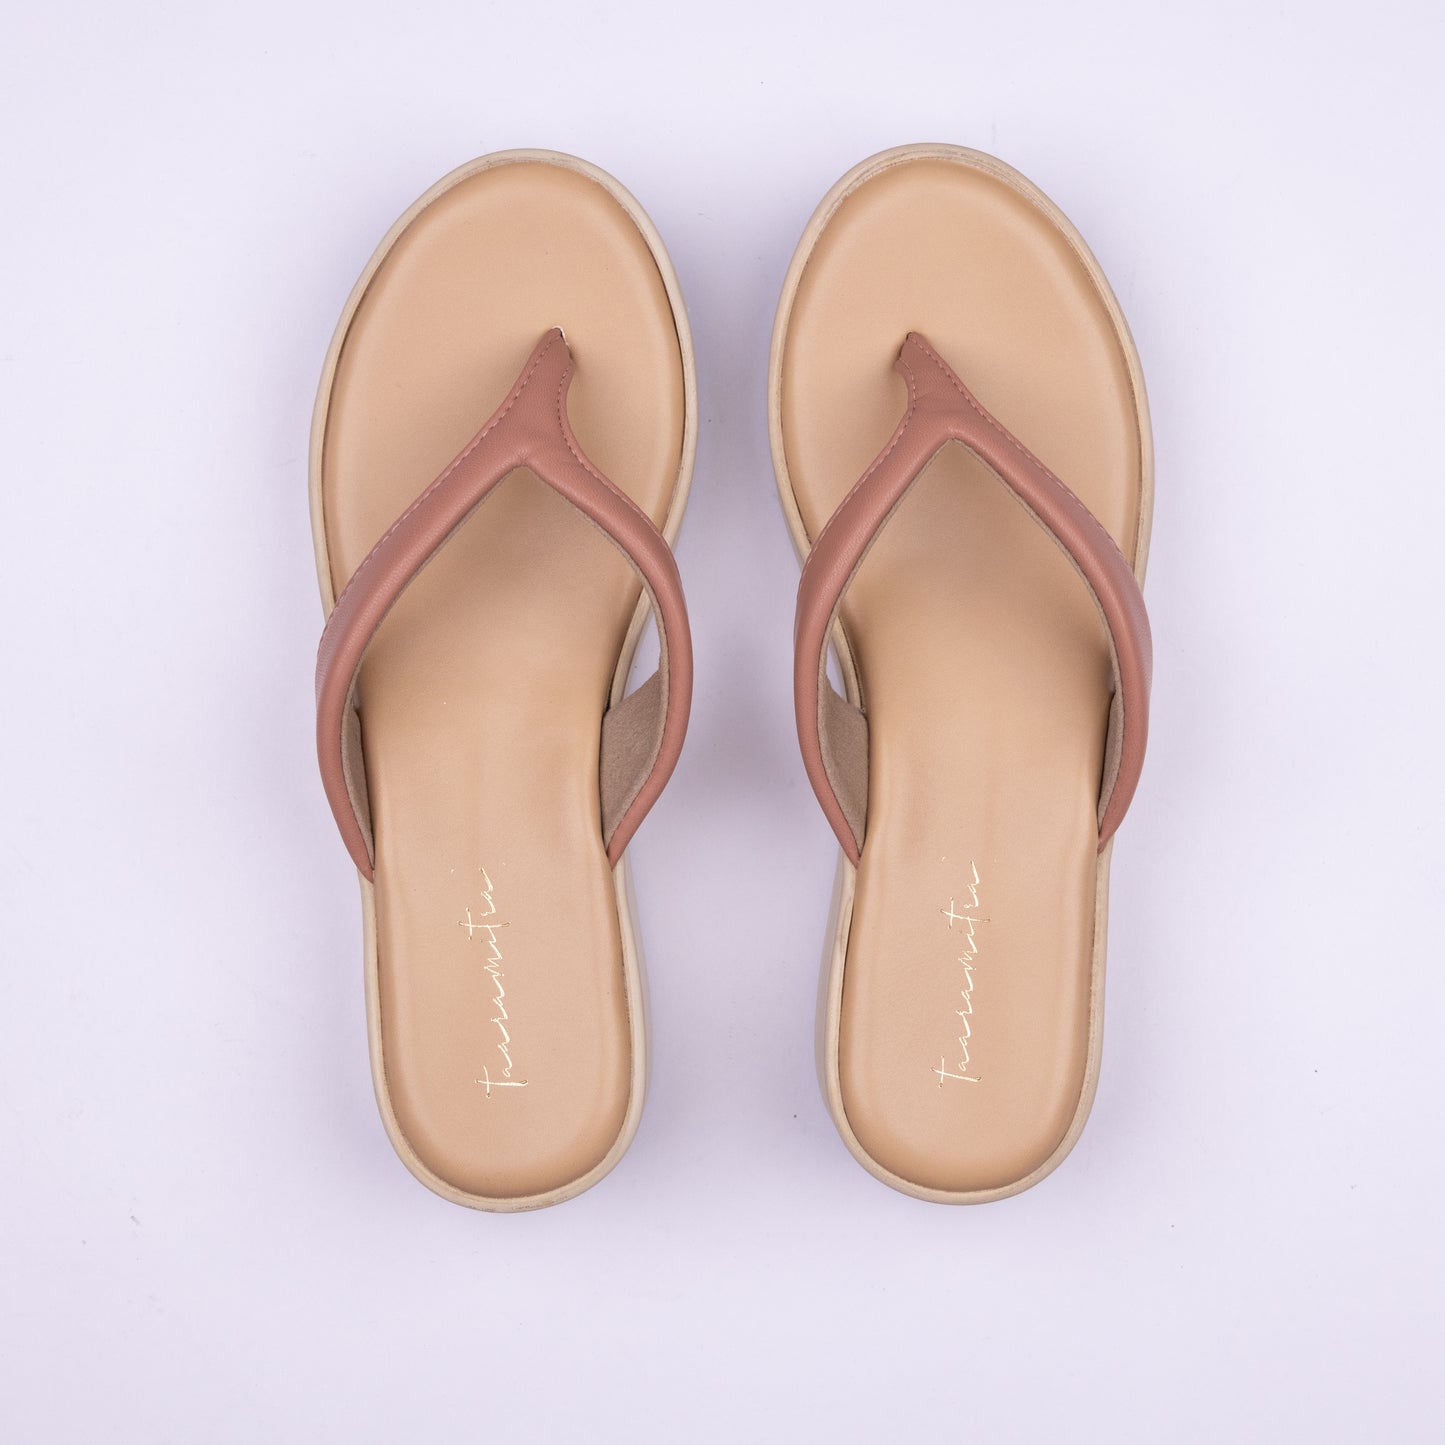 Veronica V strap wedges in Peach